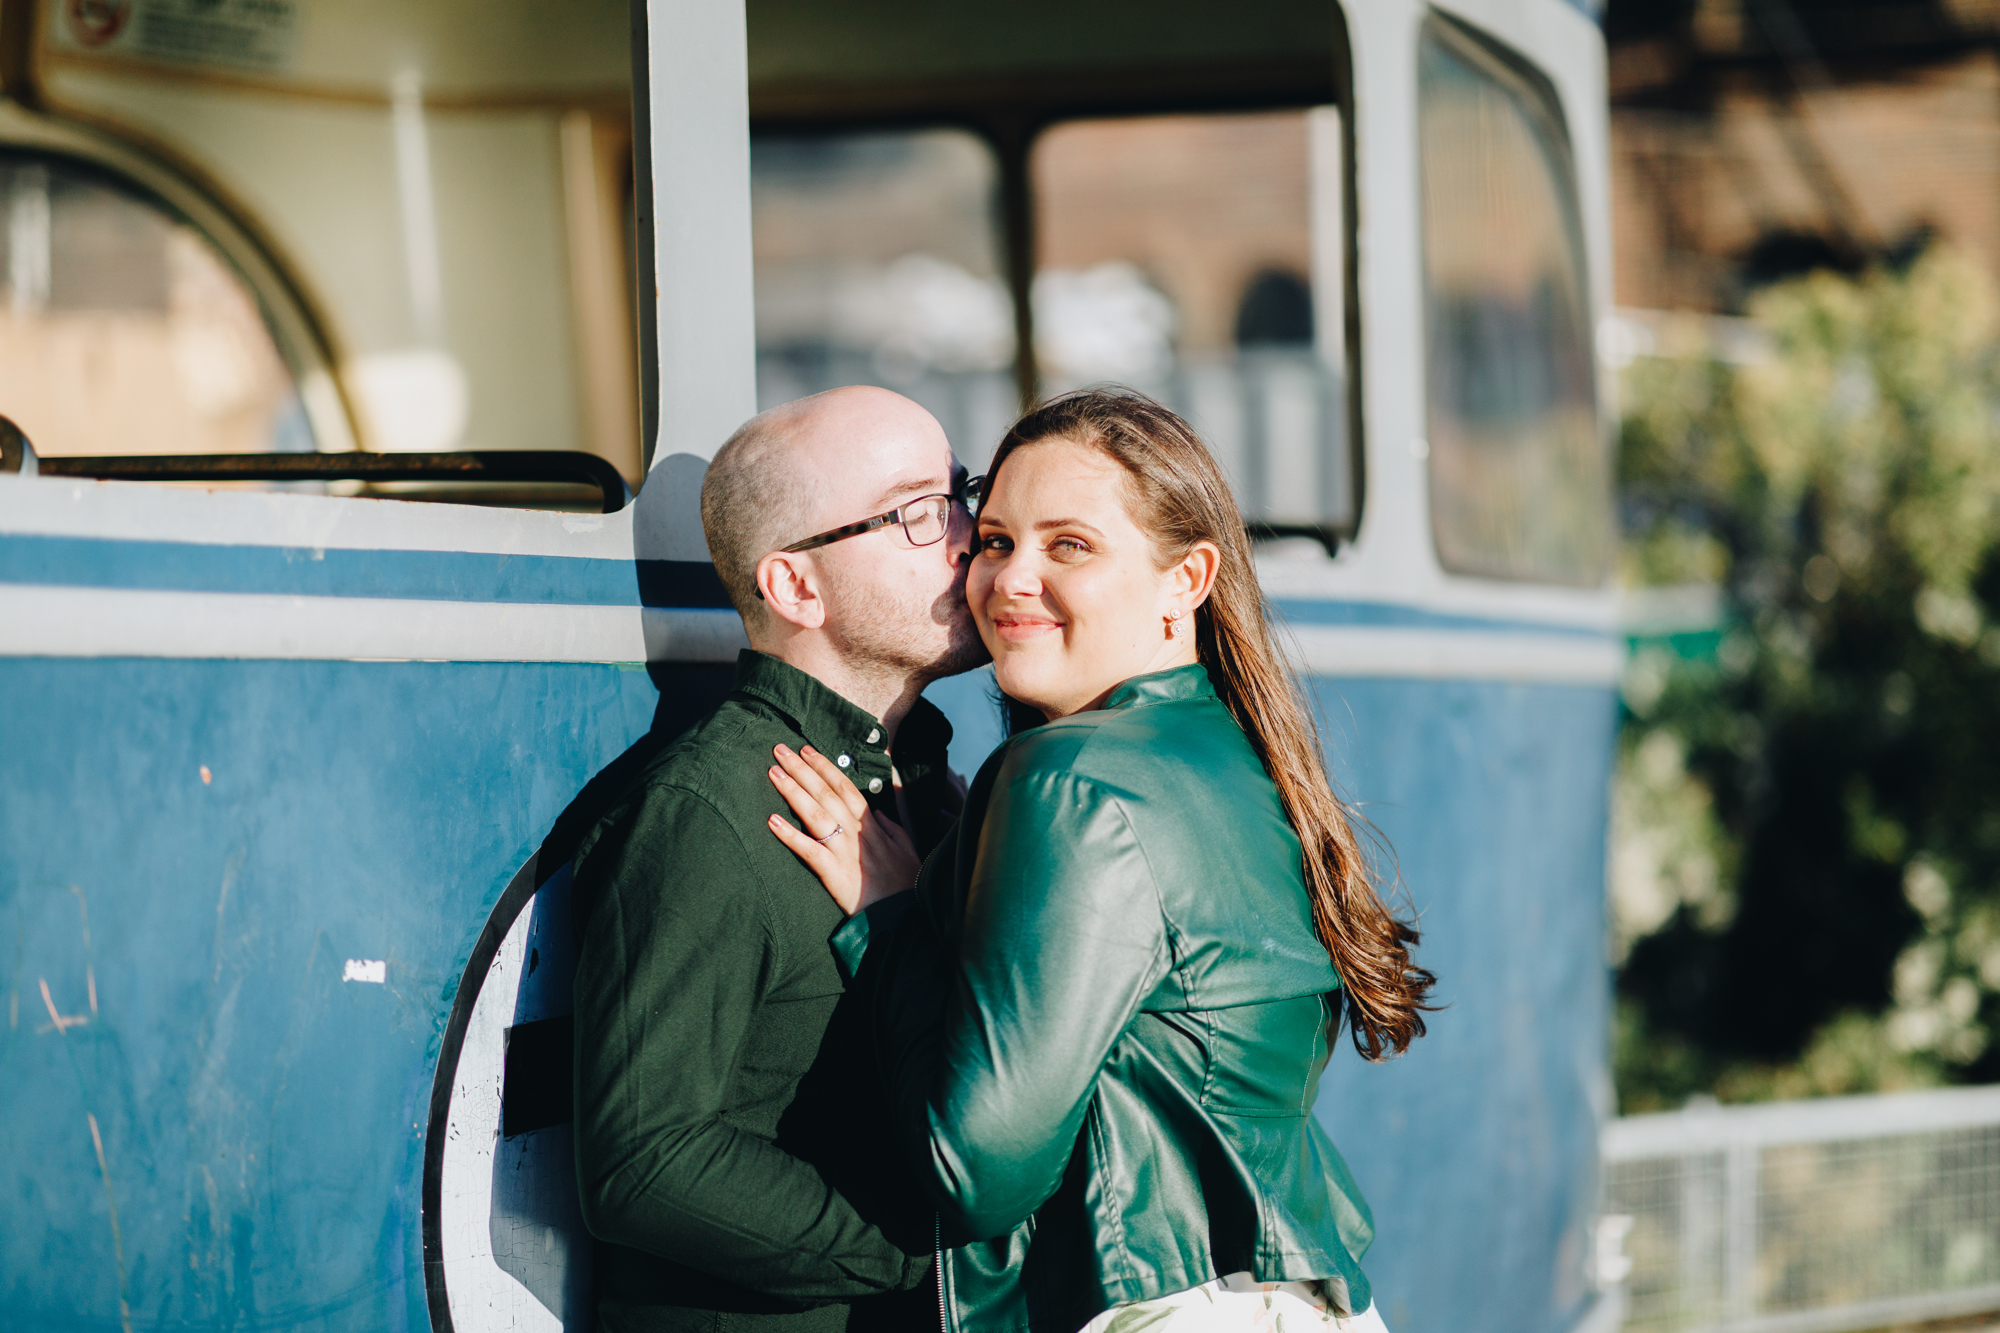 Beautiful Low-Key Ceremony at Waterfront Redhook Elopement